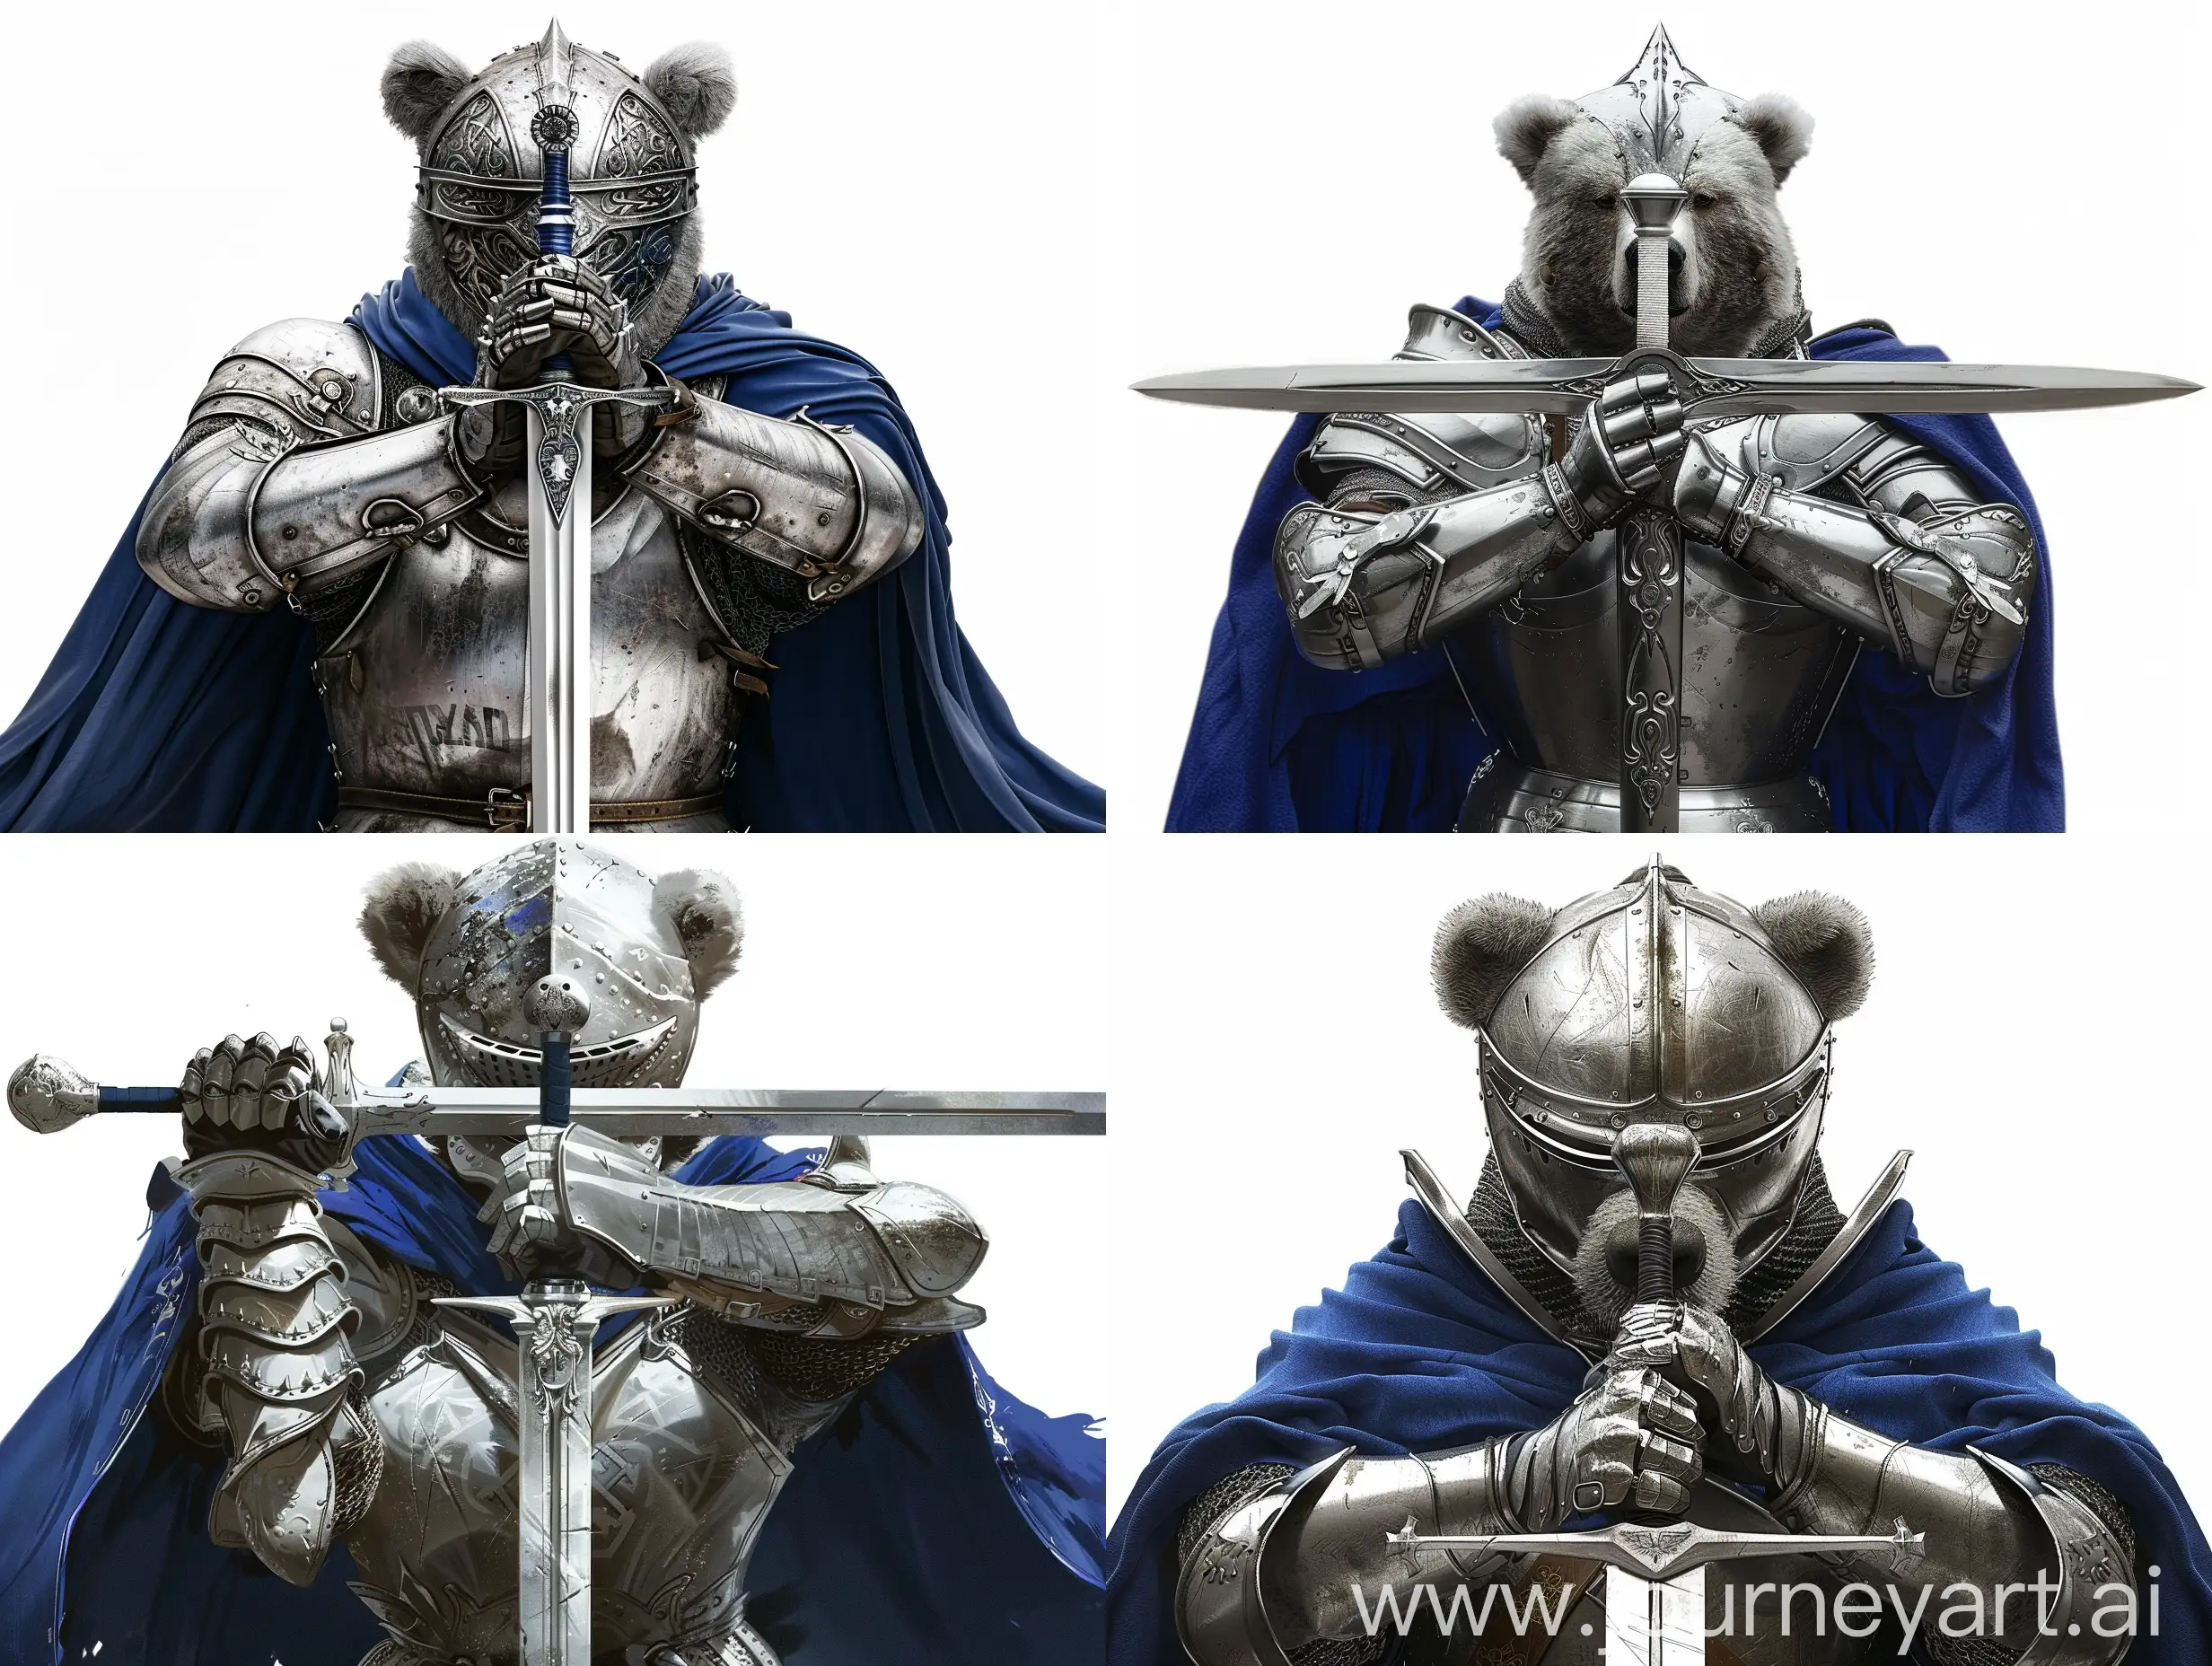 Valiant-Knight-in-Silver-Armor-with-Bear-Shoulders-and-Royal-Blue-Cloak-on-White-Background